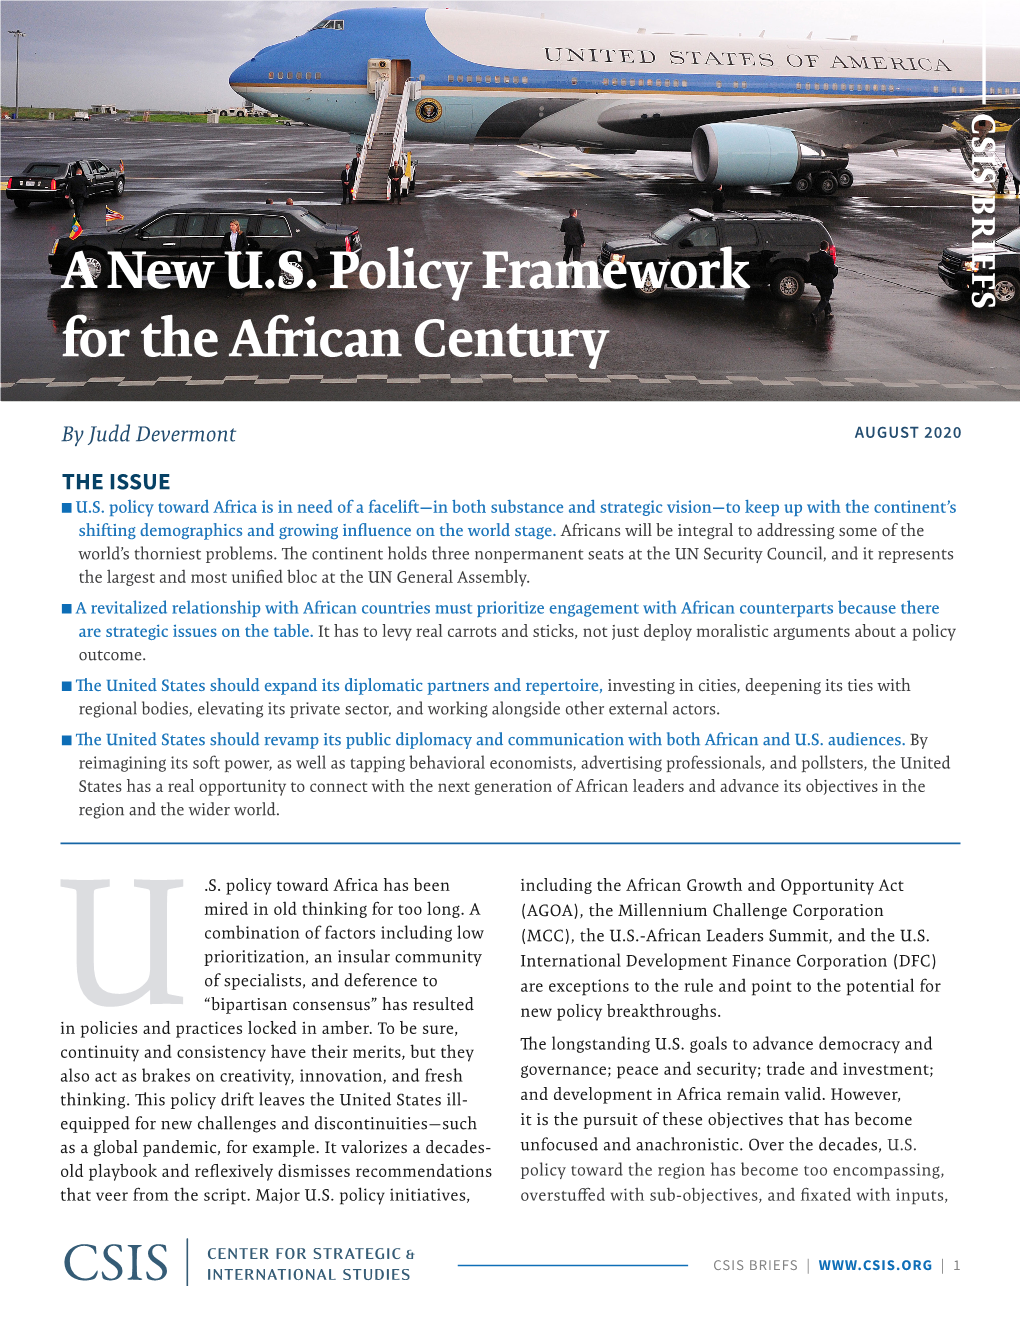 A New U.S. Policy Framework for the African Century